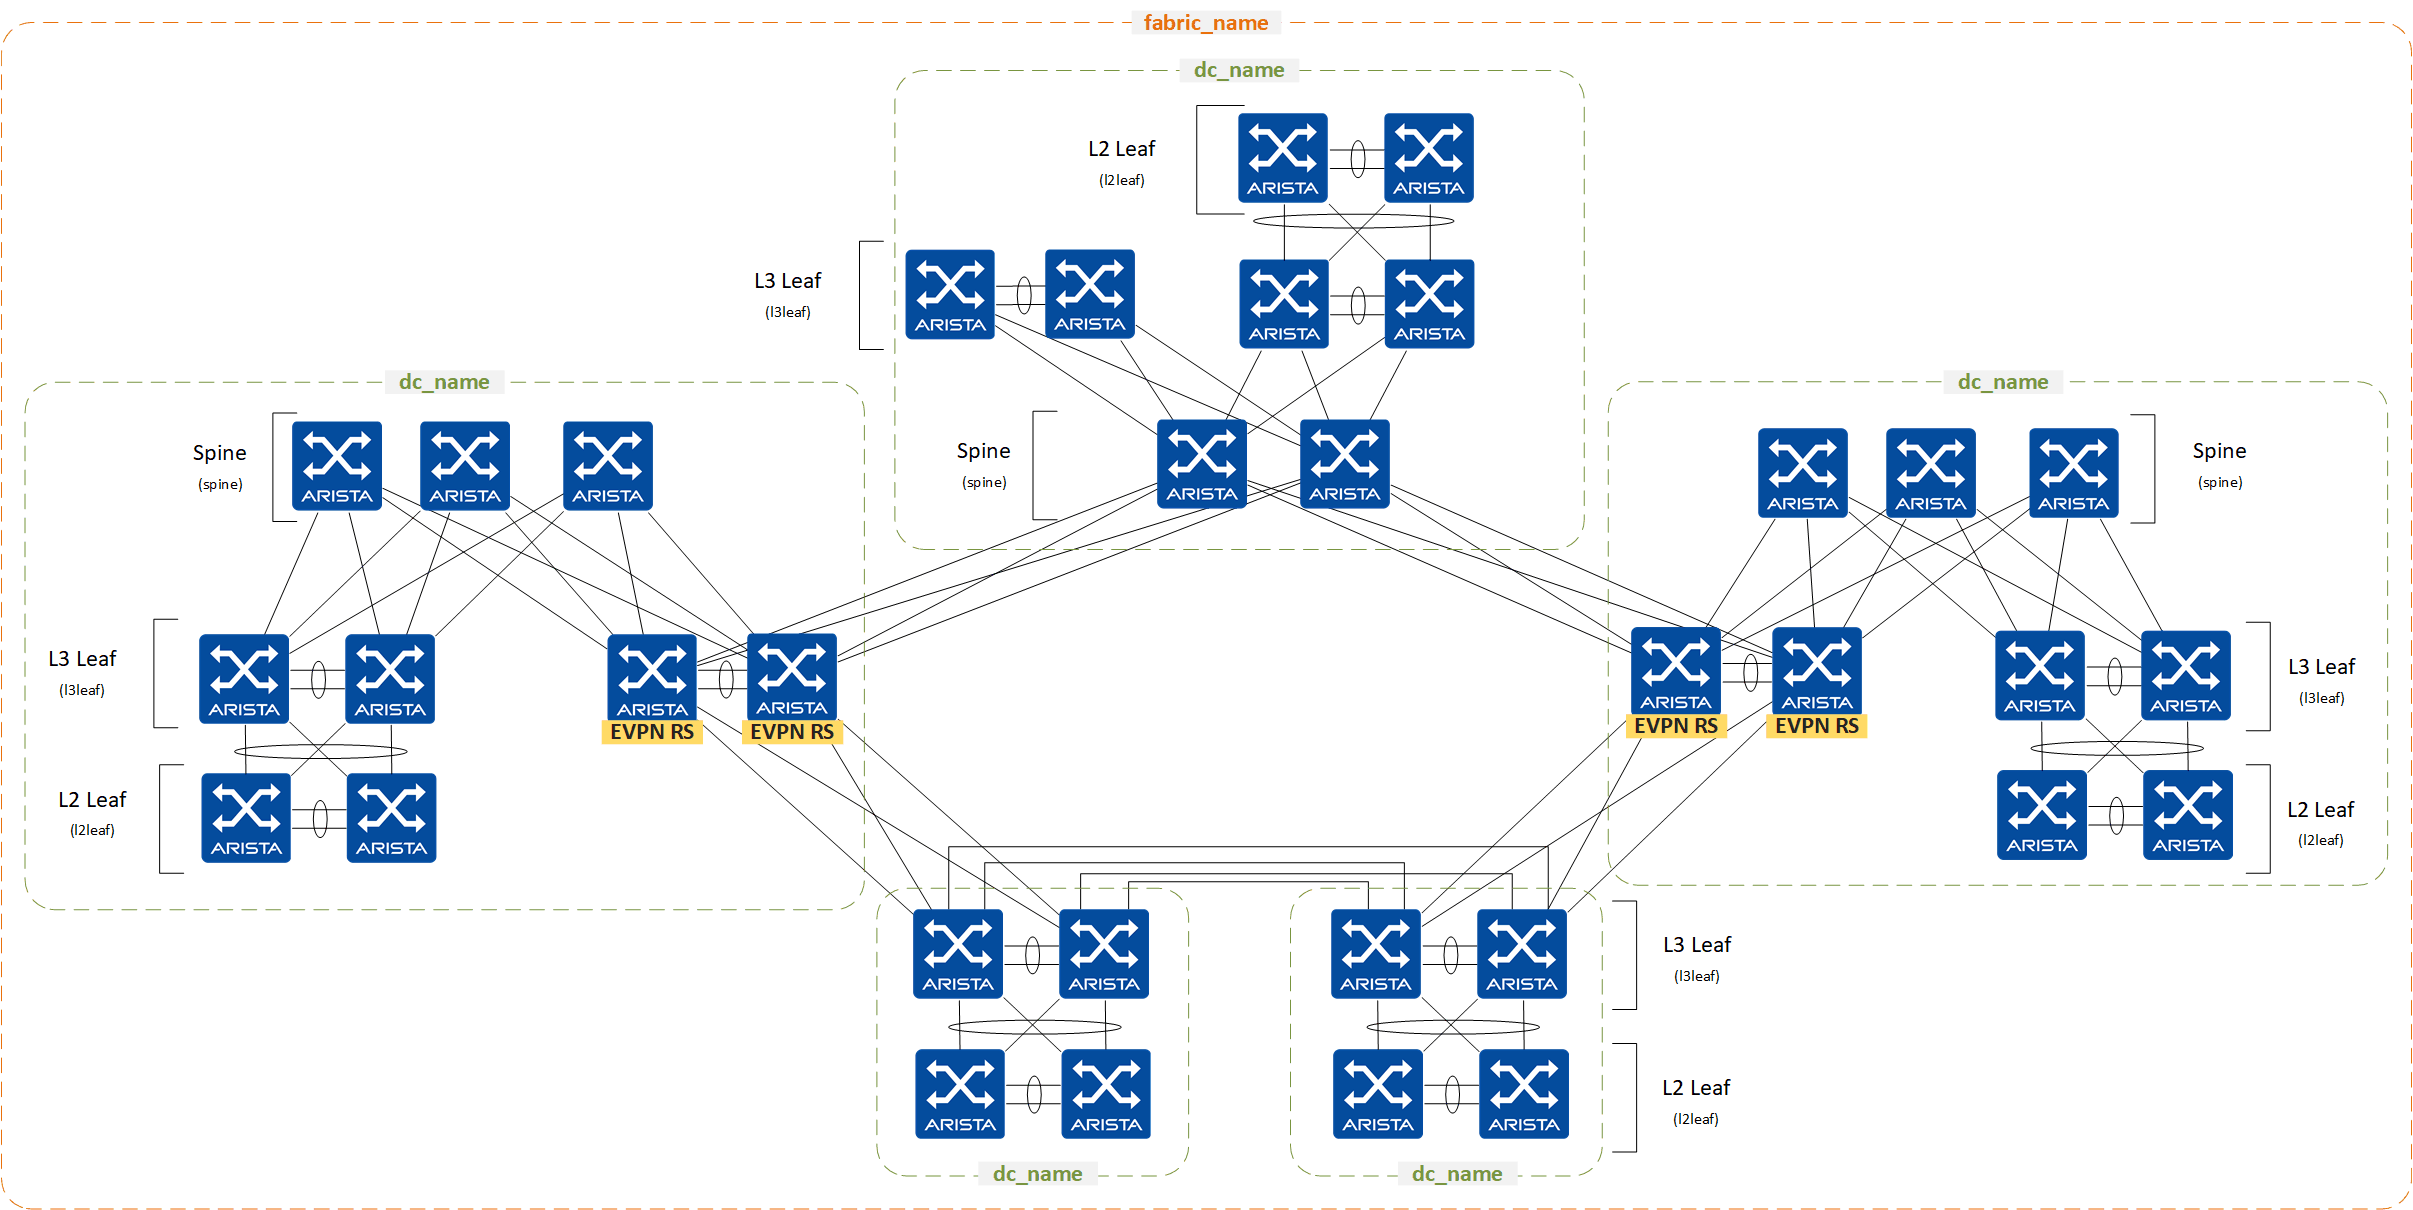 Disaggregated topology example